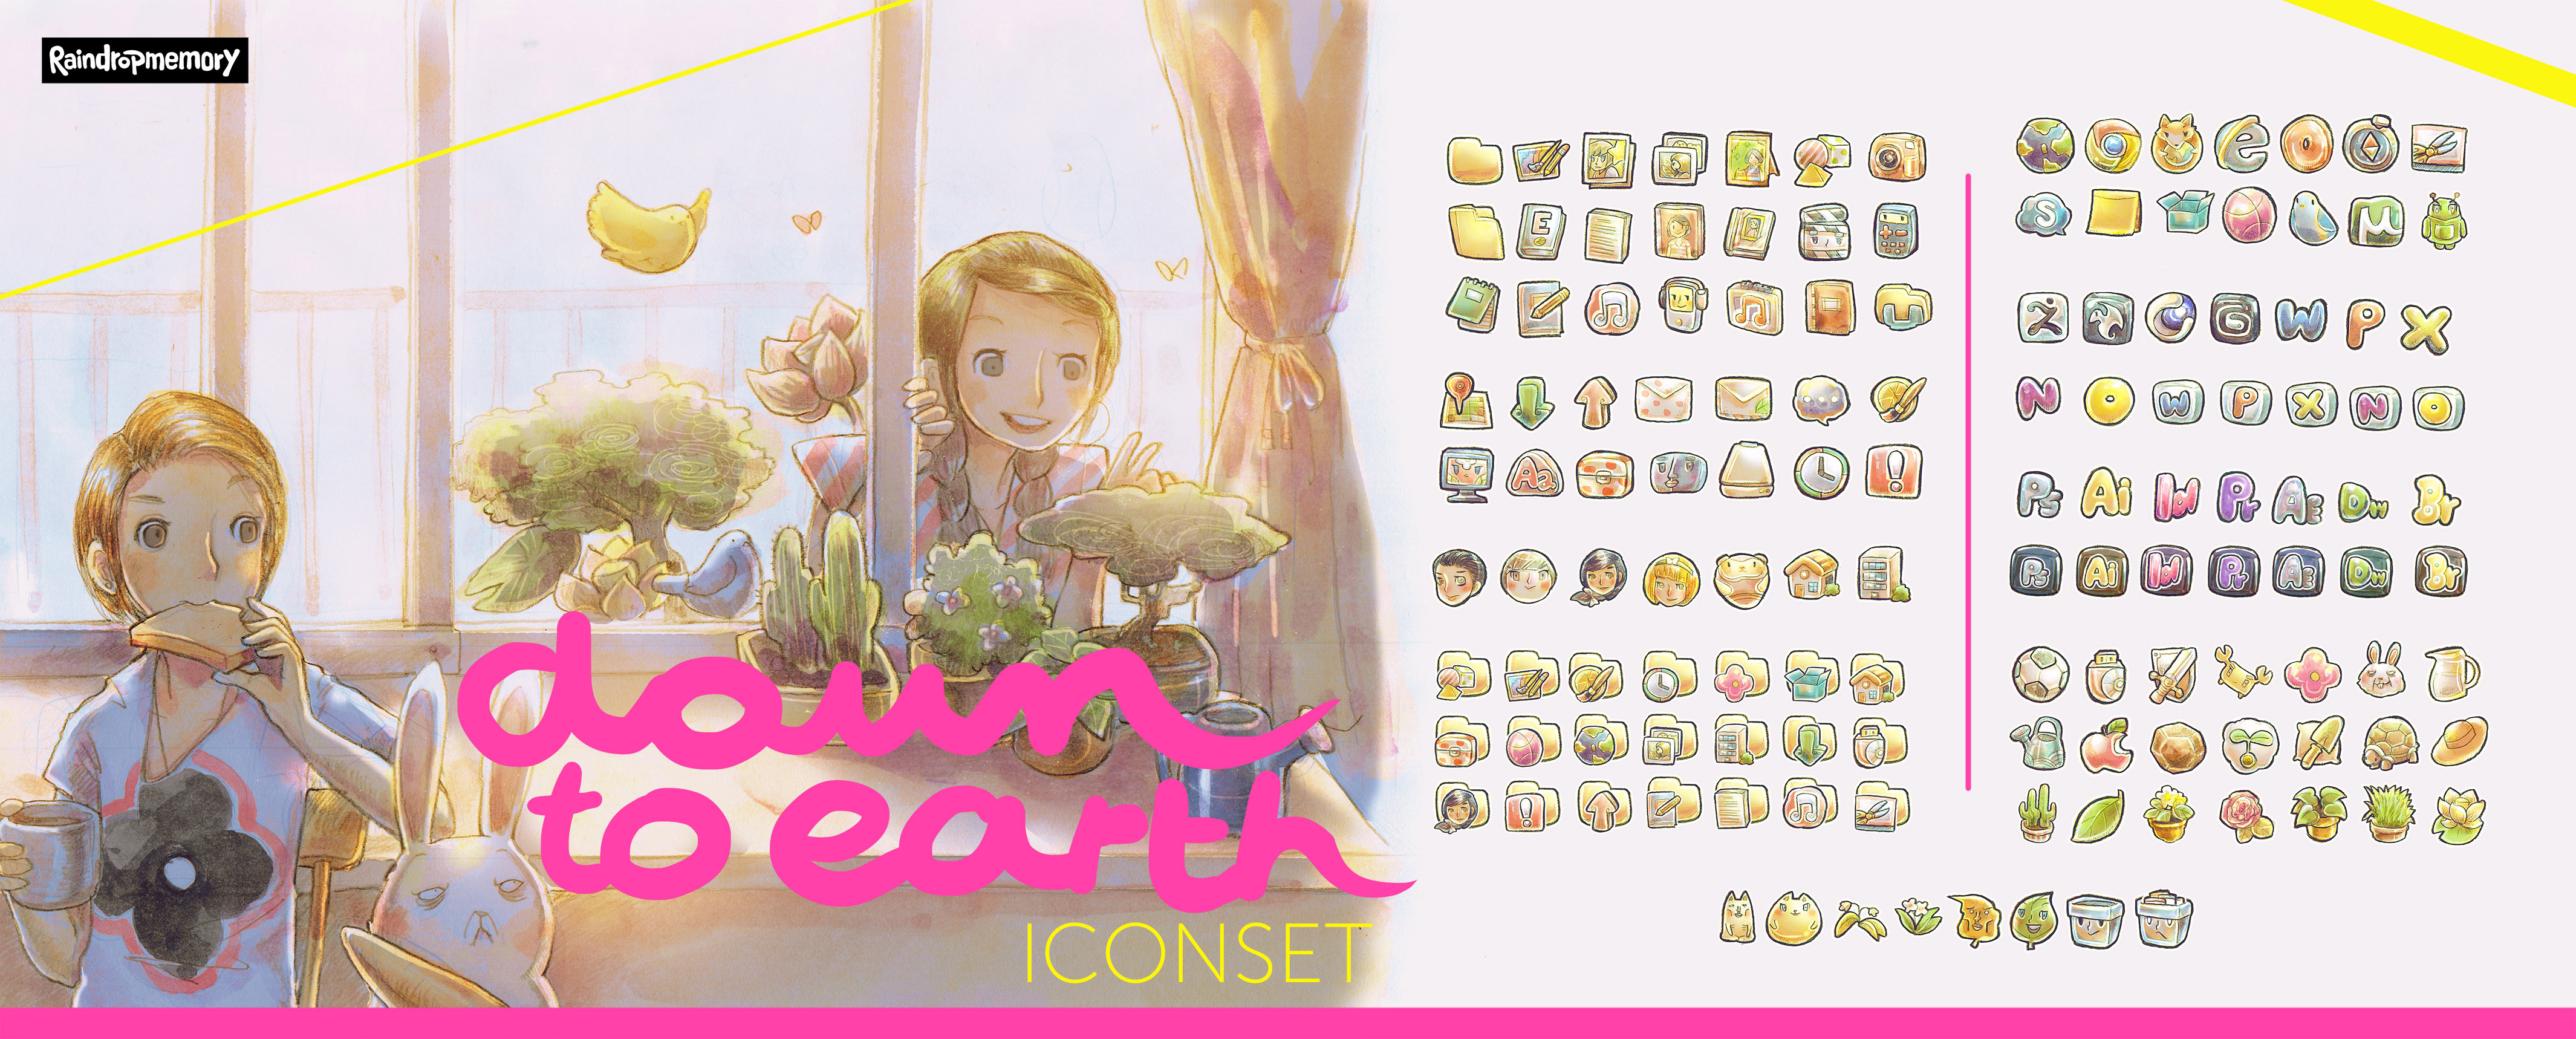 [down to earth] Iconset